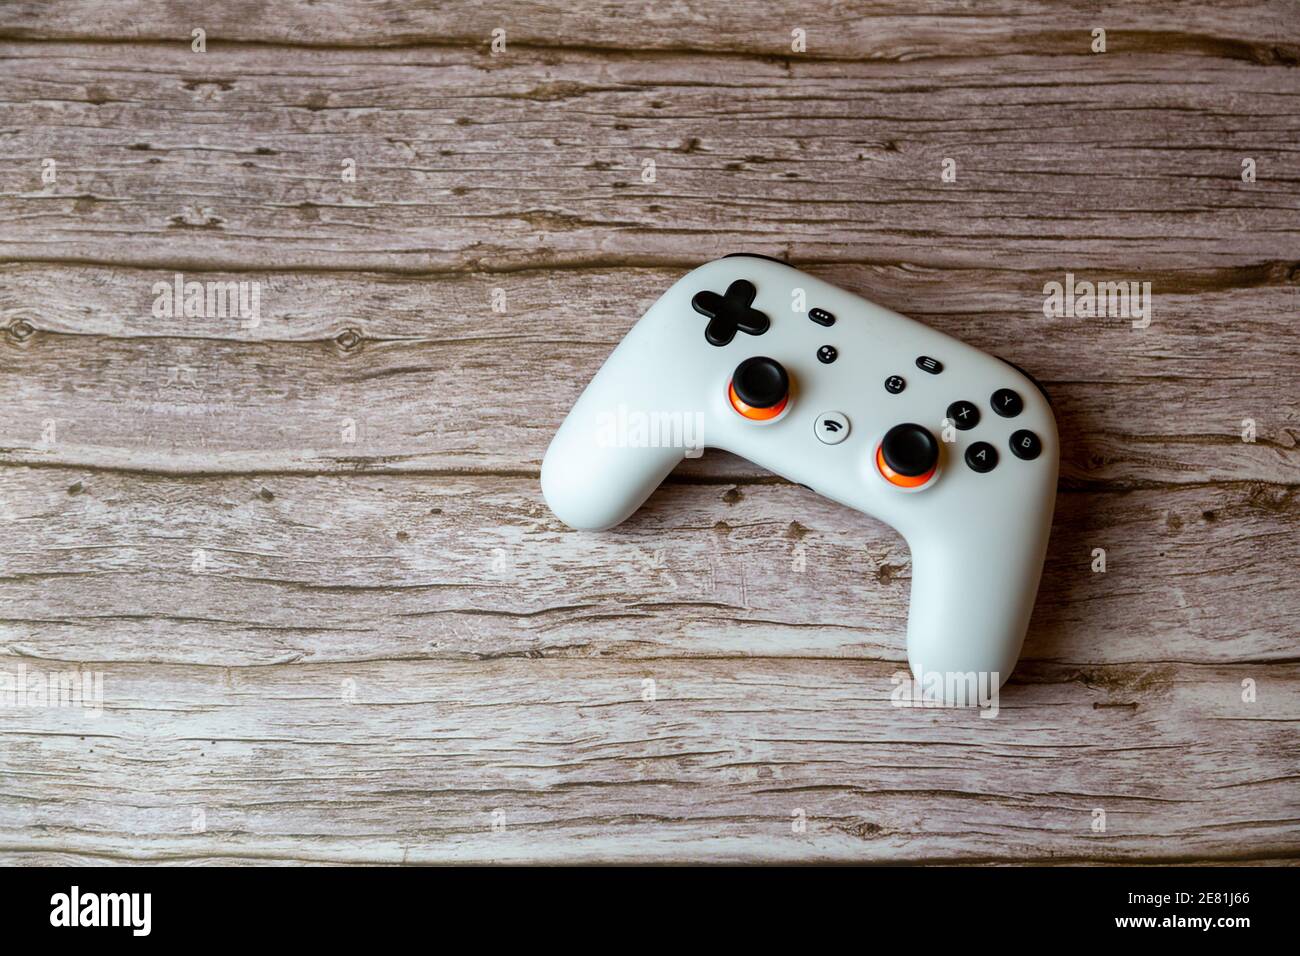 A Google Stadia controller laid on a wooden table shot from above Stock Photo